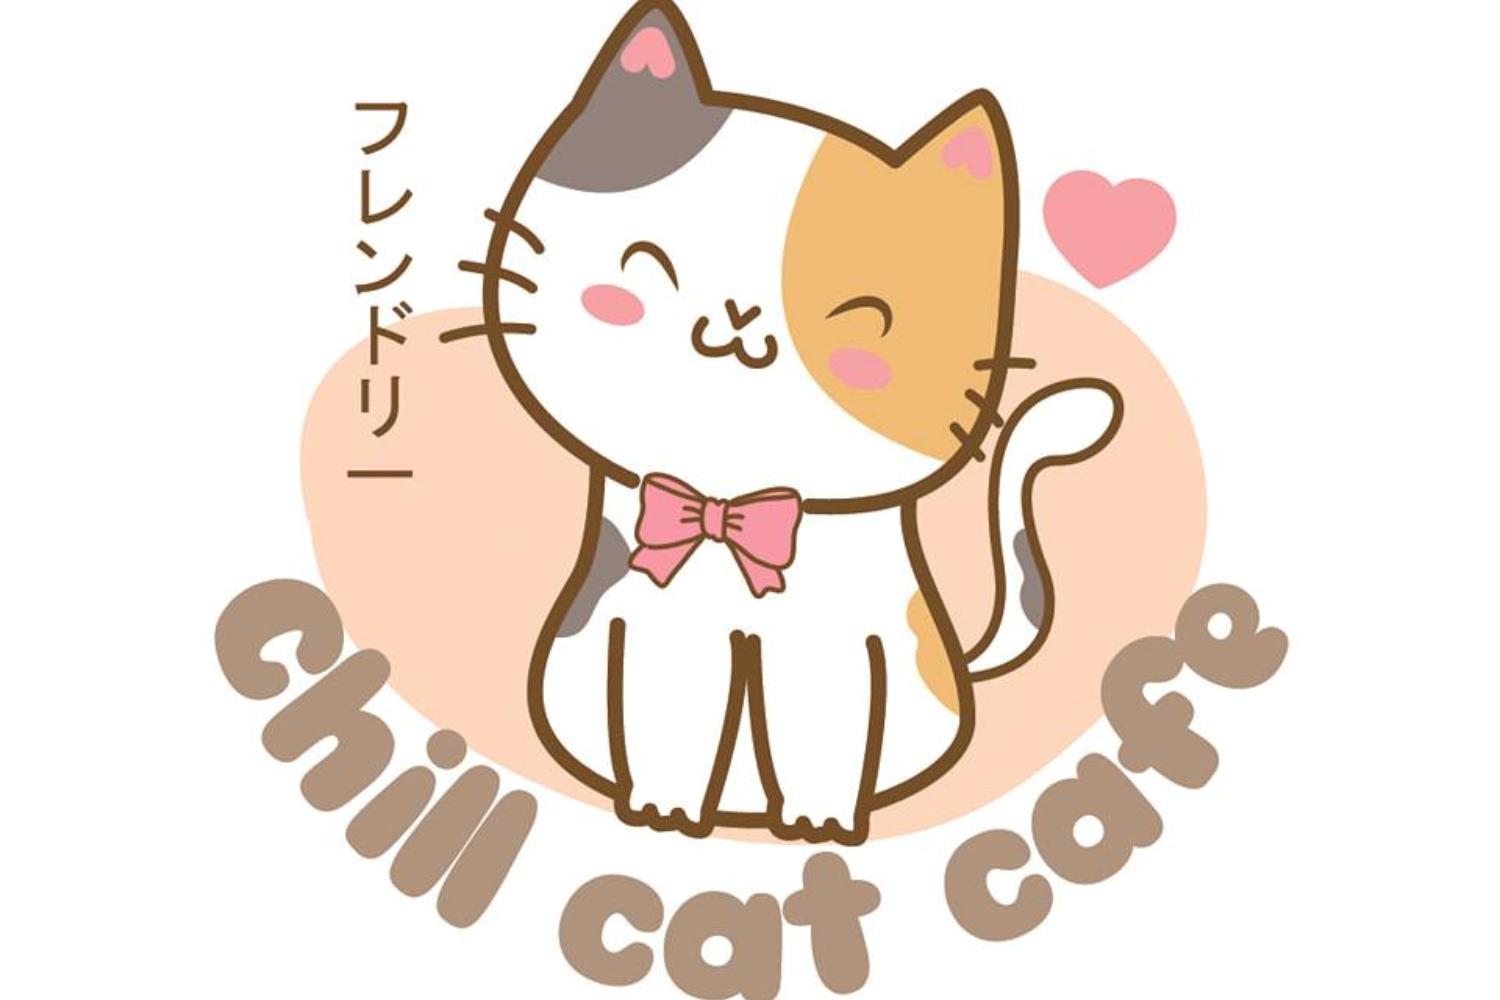 Chill cat cafe